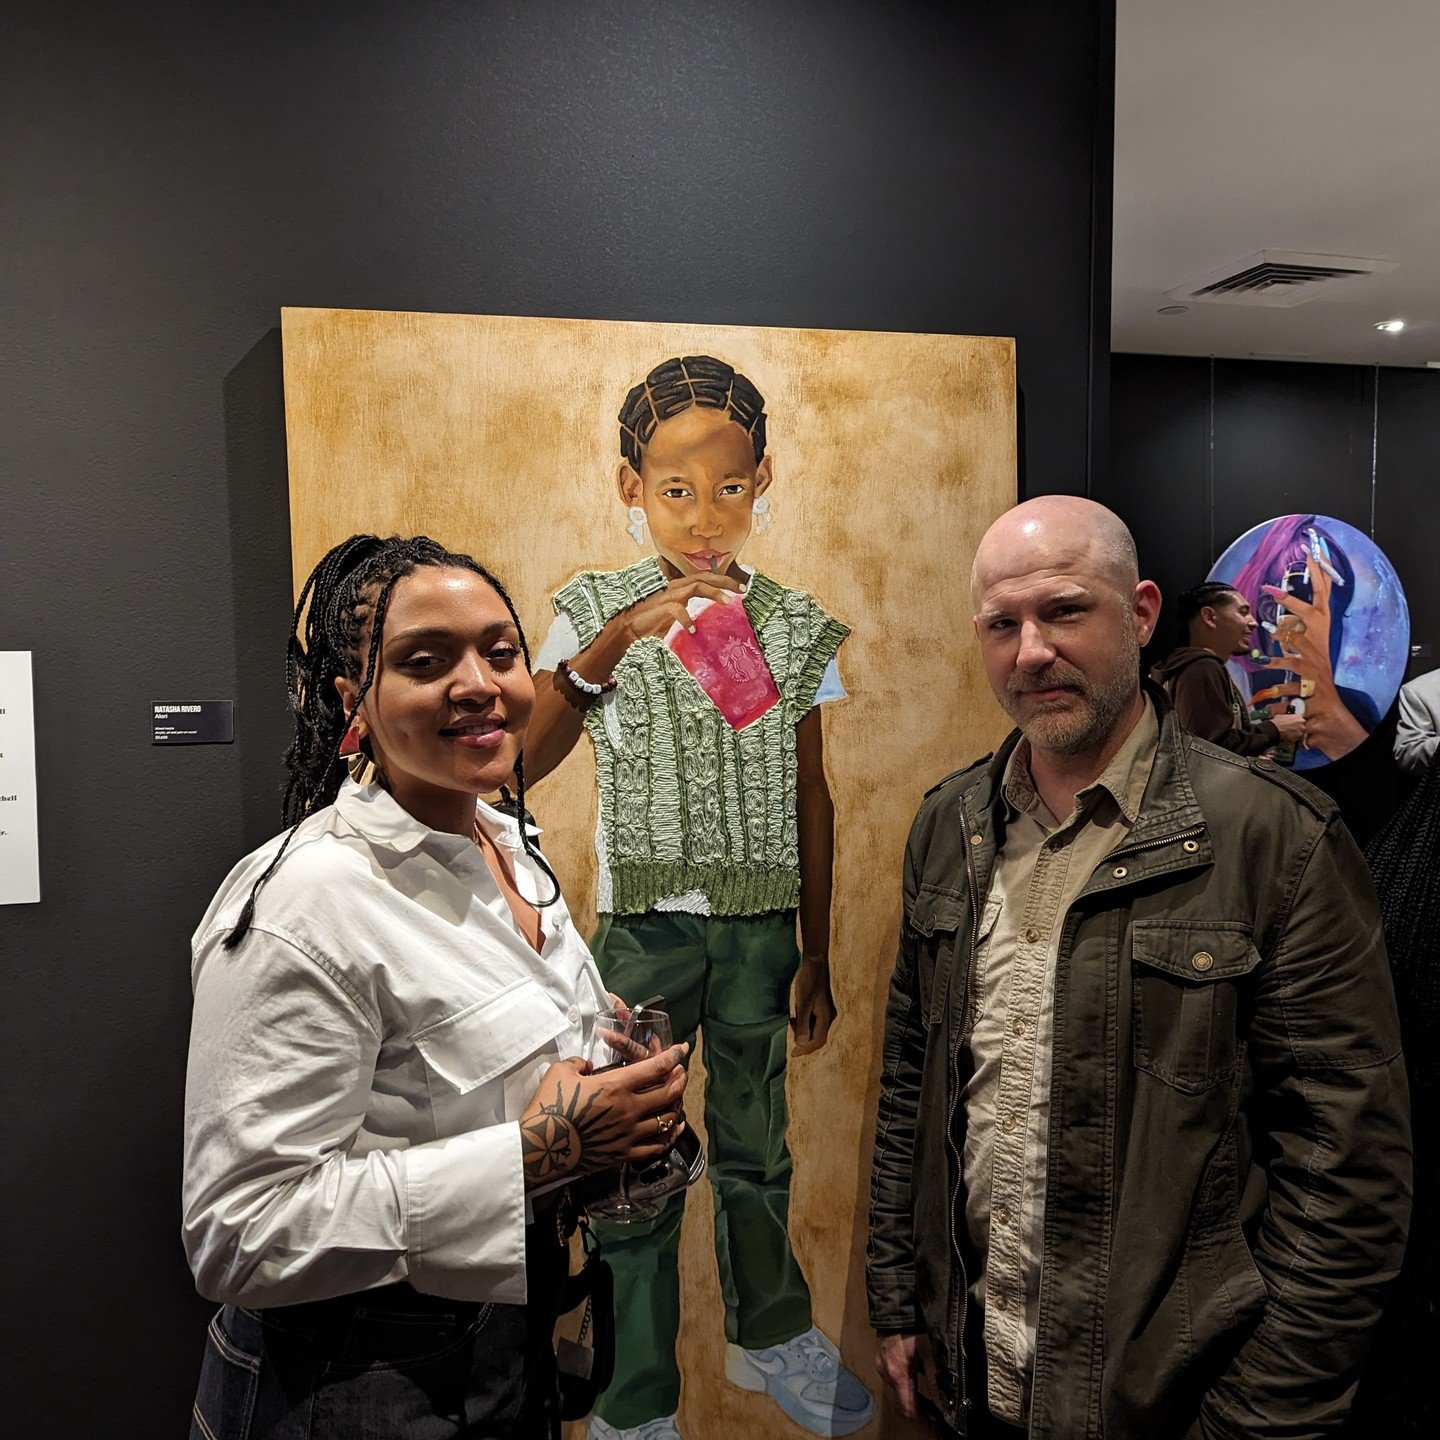 So happy to join my friend and favorite painter Natasha @creatorthreedot at the Andaz on Sunset Boulevard to see her latest painting featured in the Black In Every Color show. Her painting will be on display until March so go check it out!

Also so l